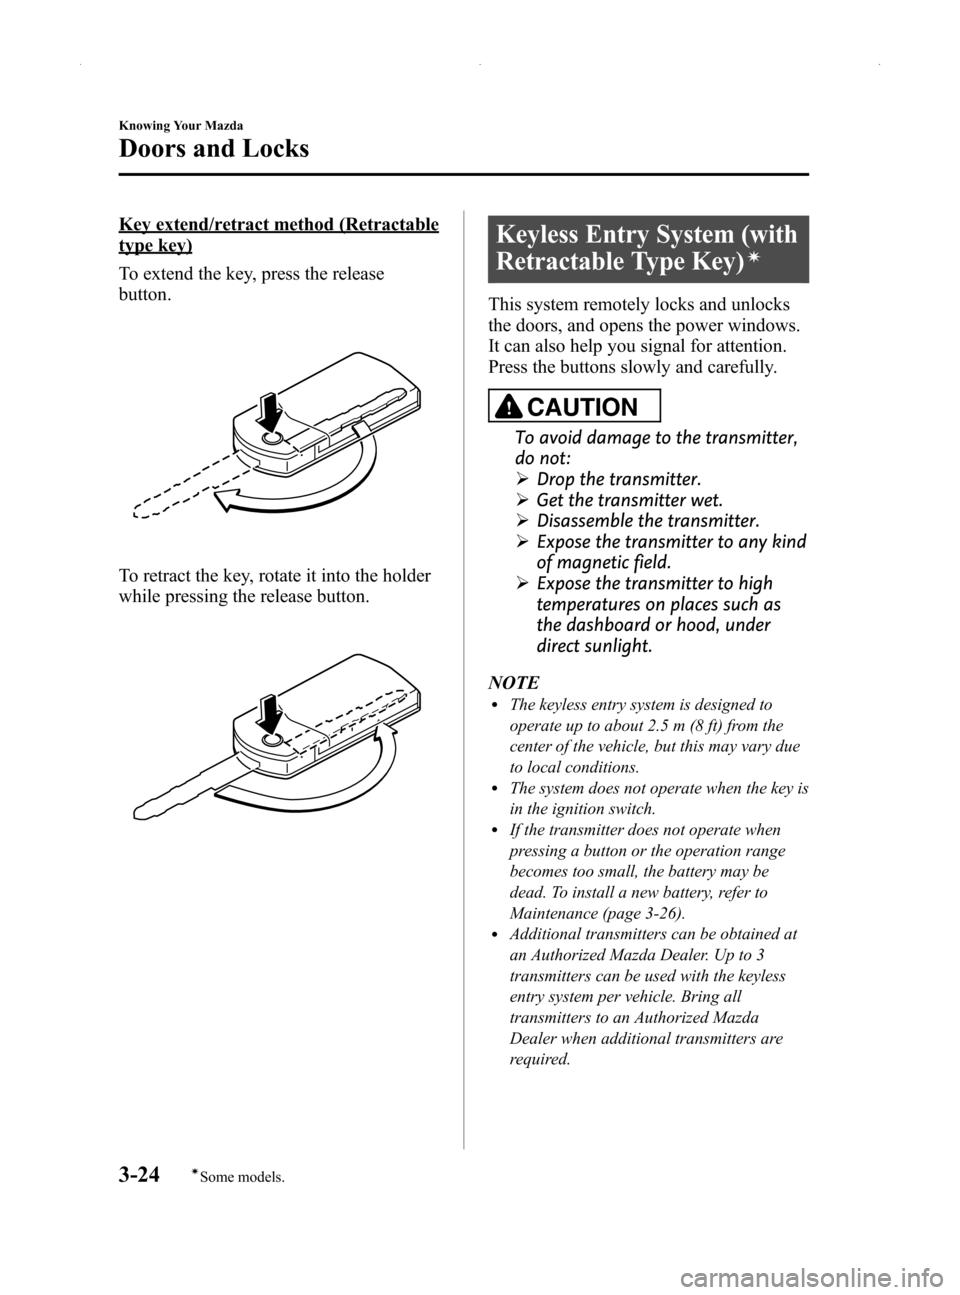 MAZDA MODEL MX-5 2014  Owners Manual (in English) Black plate (78,1)
Key extend/retract method (Retractable
type key)
To extend the key, press the release
button.
To retract the key, rotate it into the holder
while pressing the release button.
Keyles